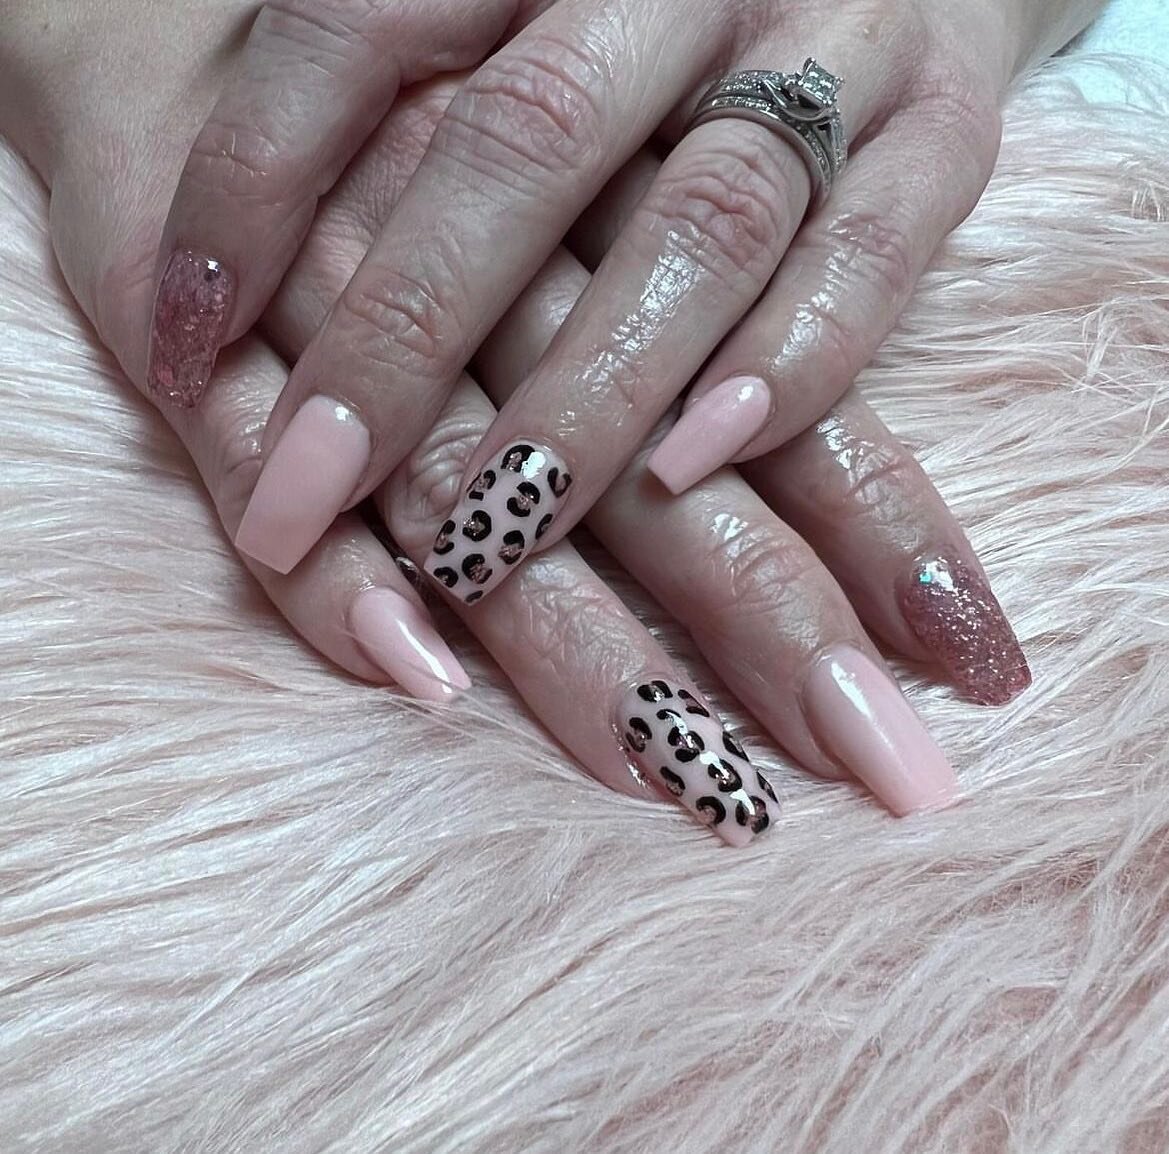 Did you know we offer acrylic nails and pedicures? 
Book your appointment today!

#nailsnailsnails #niagaranails #acrylicnails #naildesign #nailsofinstagram